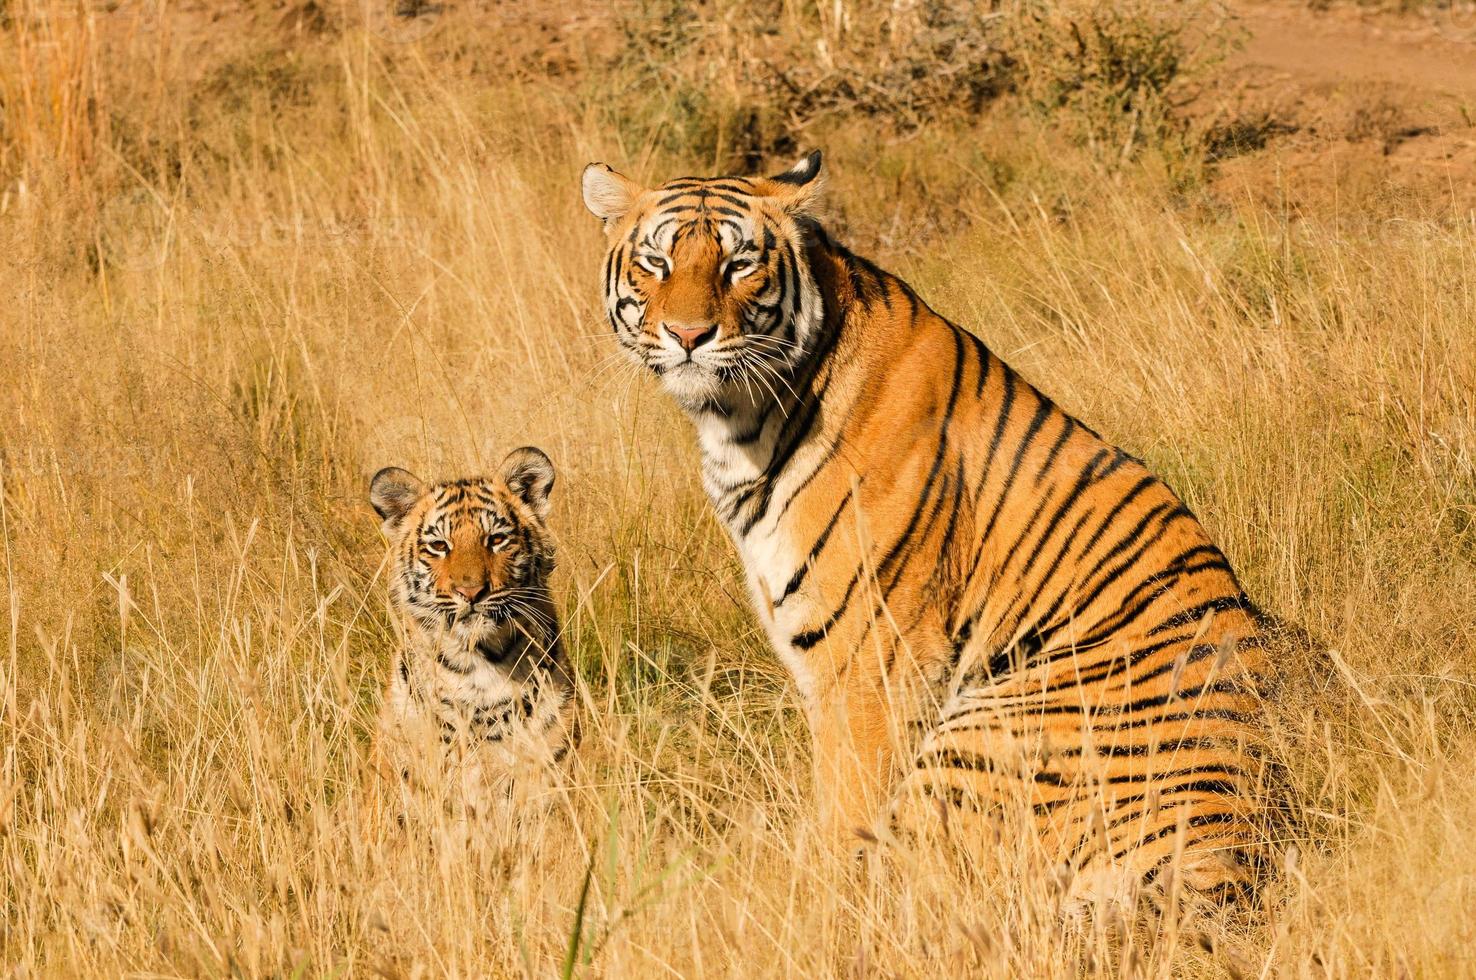 Tiger mother with her cub photo